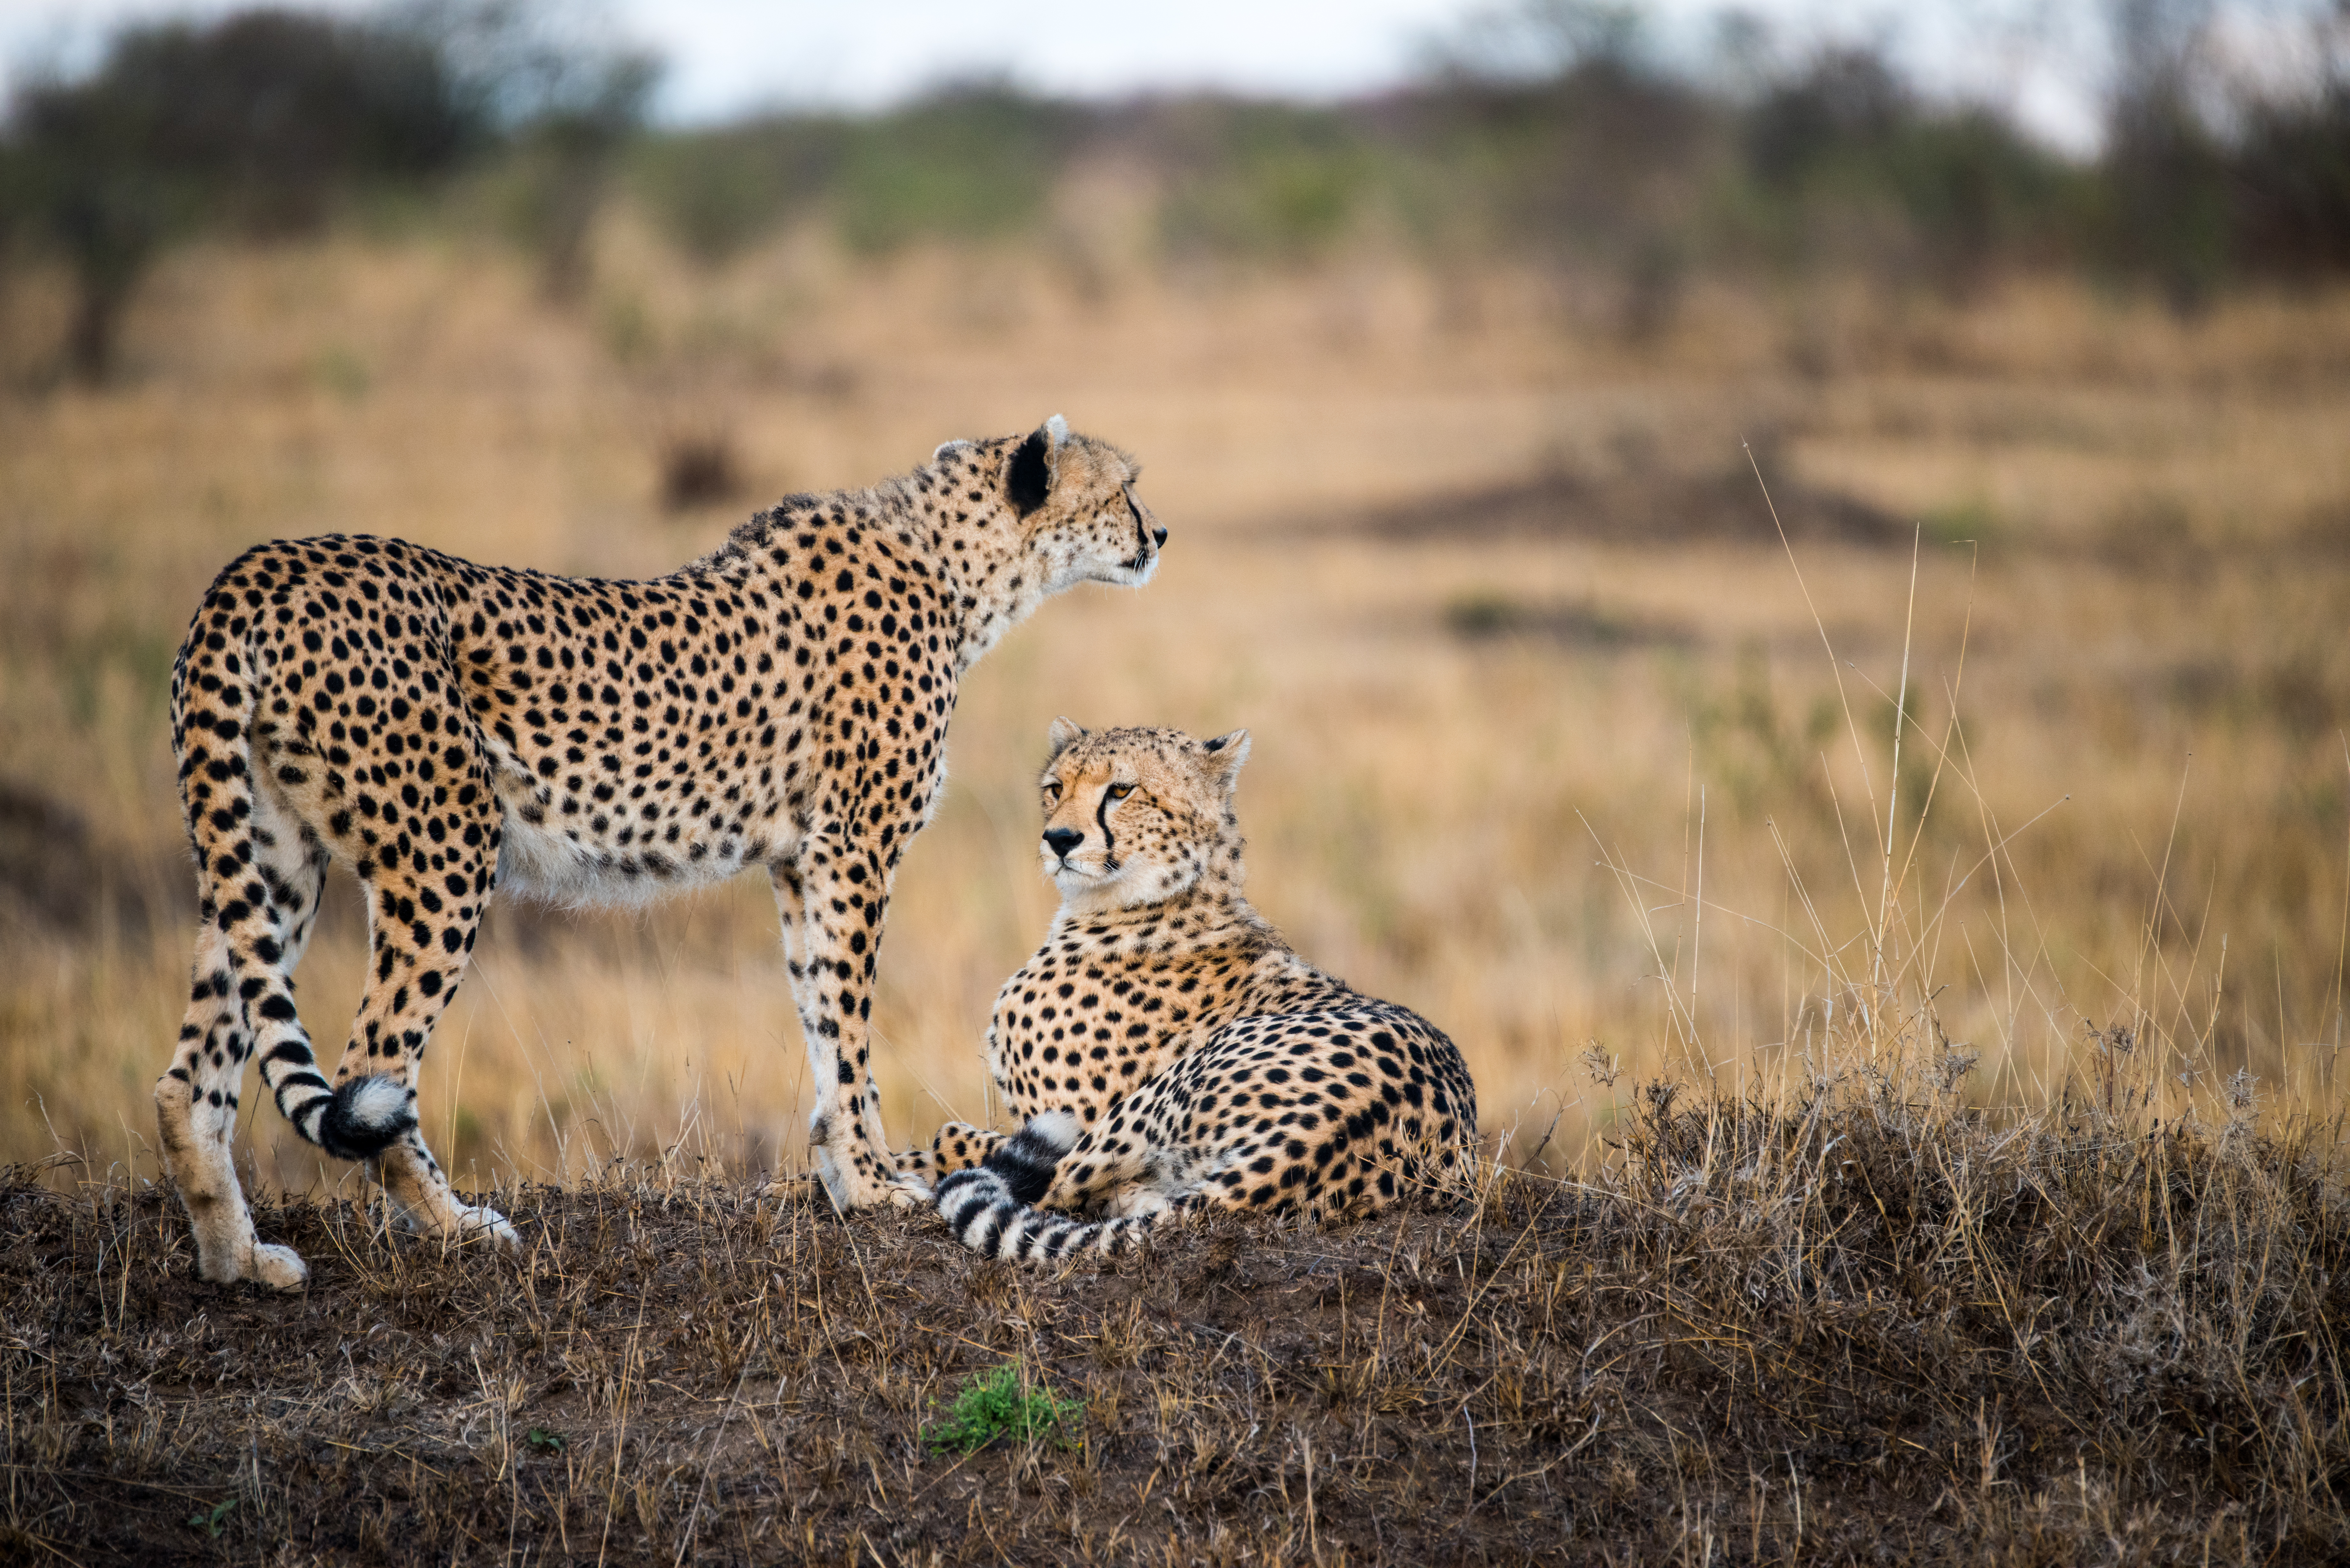 One standing and one resting cheetah